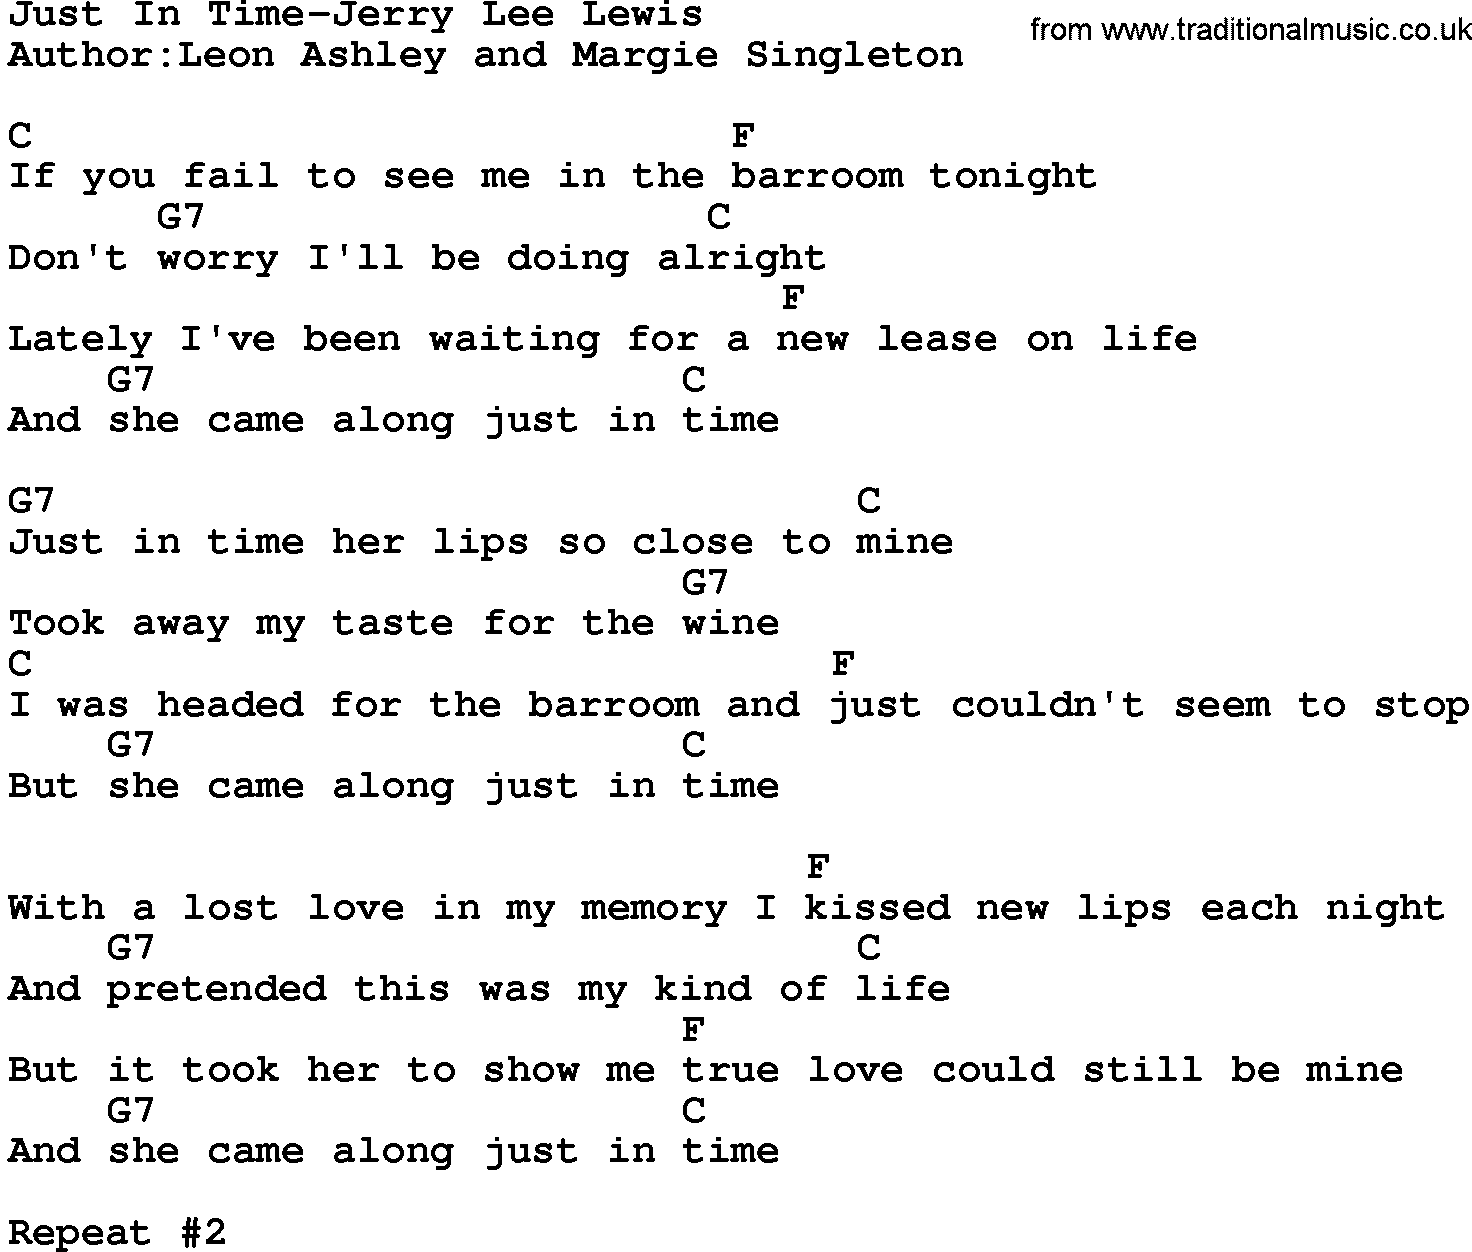 Country music song: Just In Time-Jerry Lee Lewis lyrics and chords